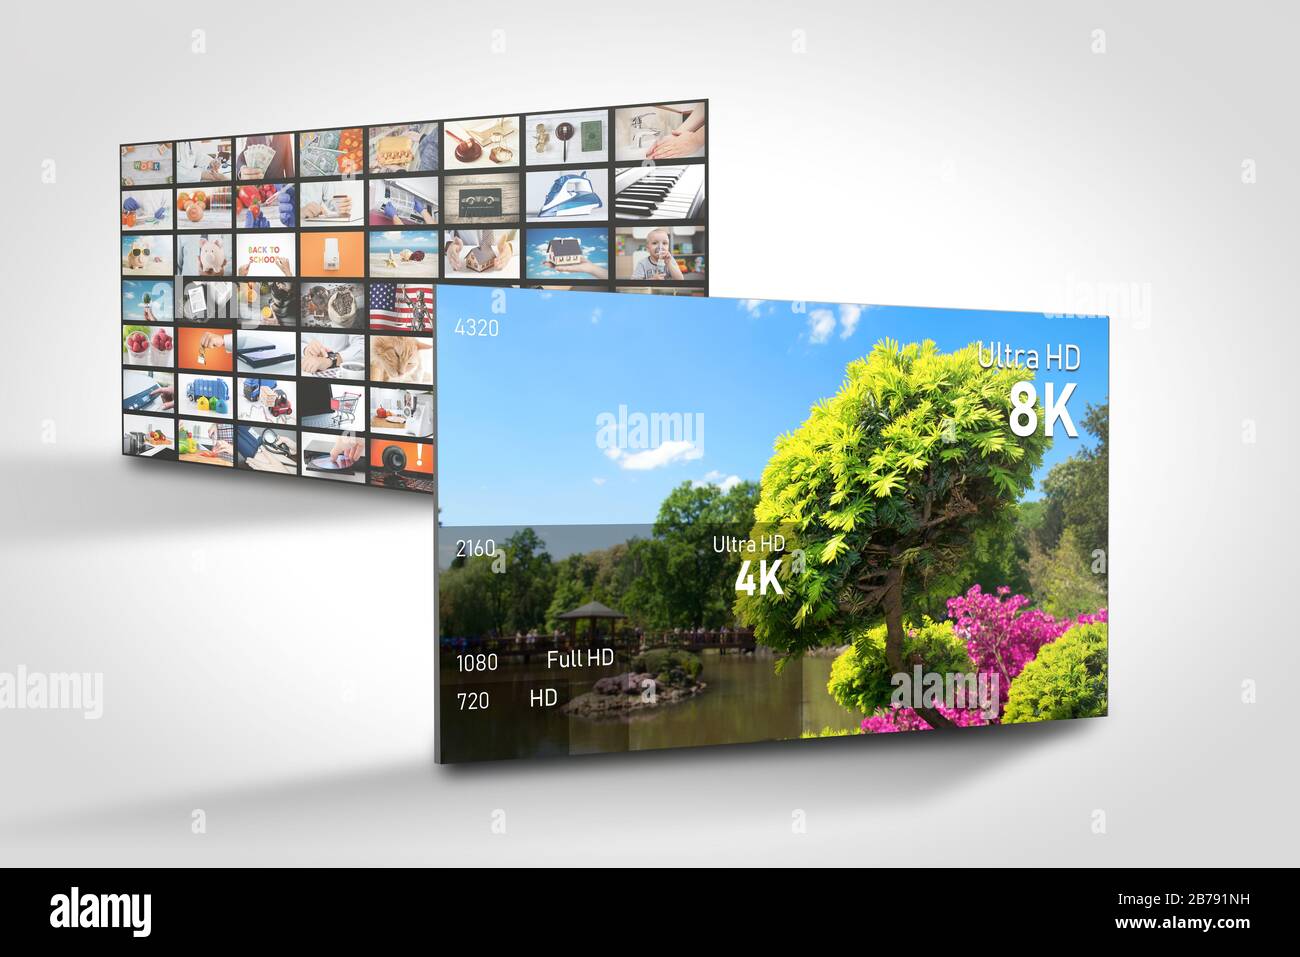 8K resolution display with comparison of resolutions. TV screen panel conceptual graphic Stock Photo